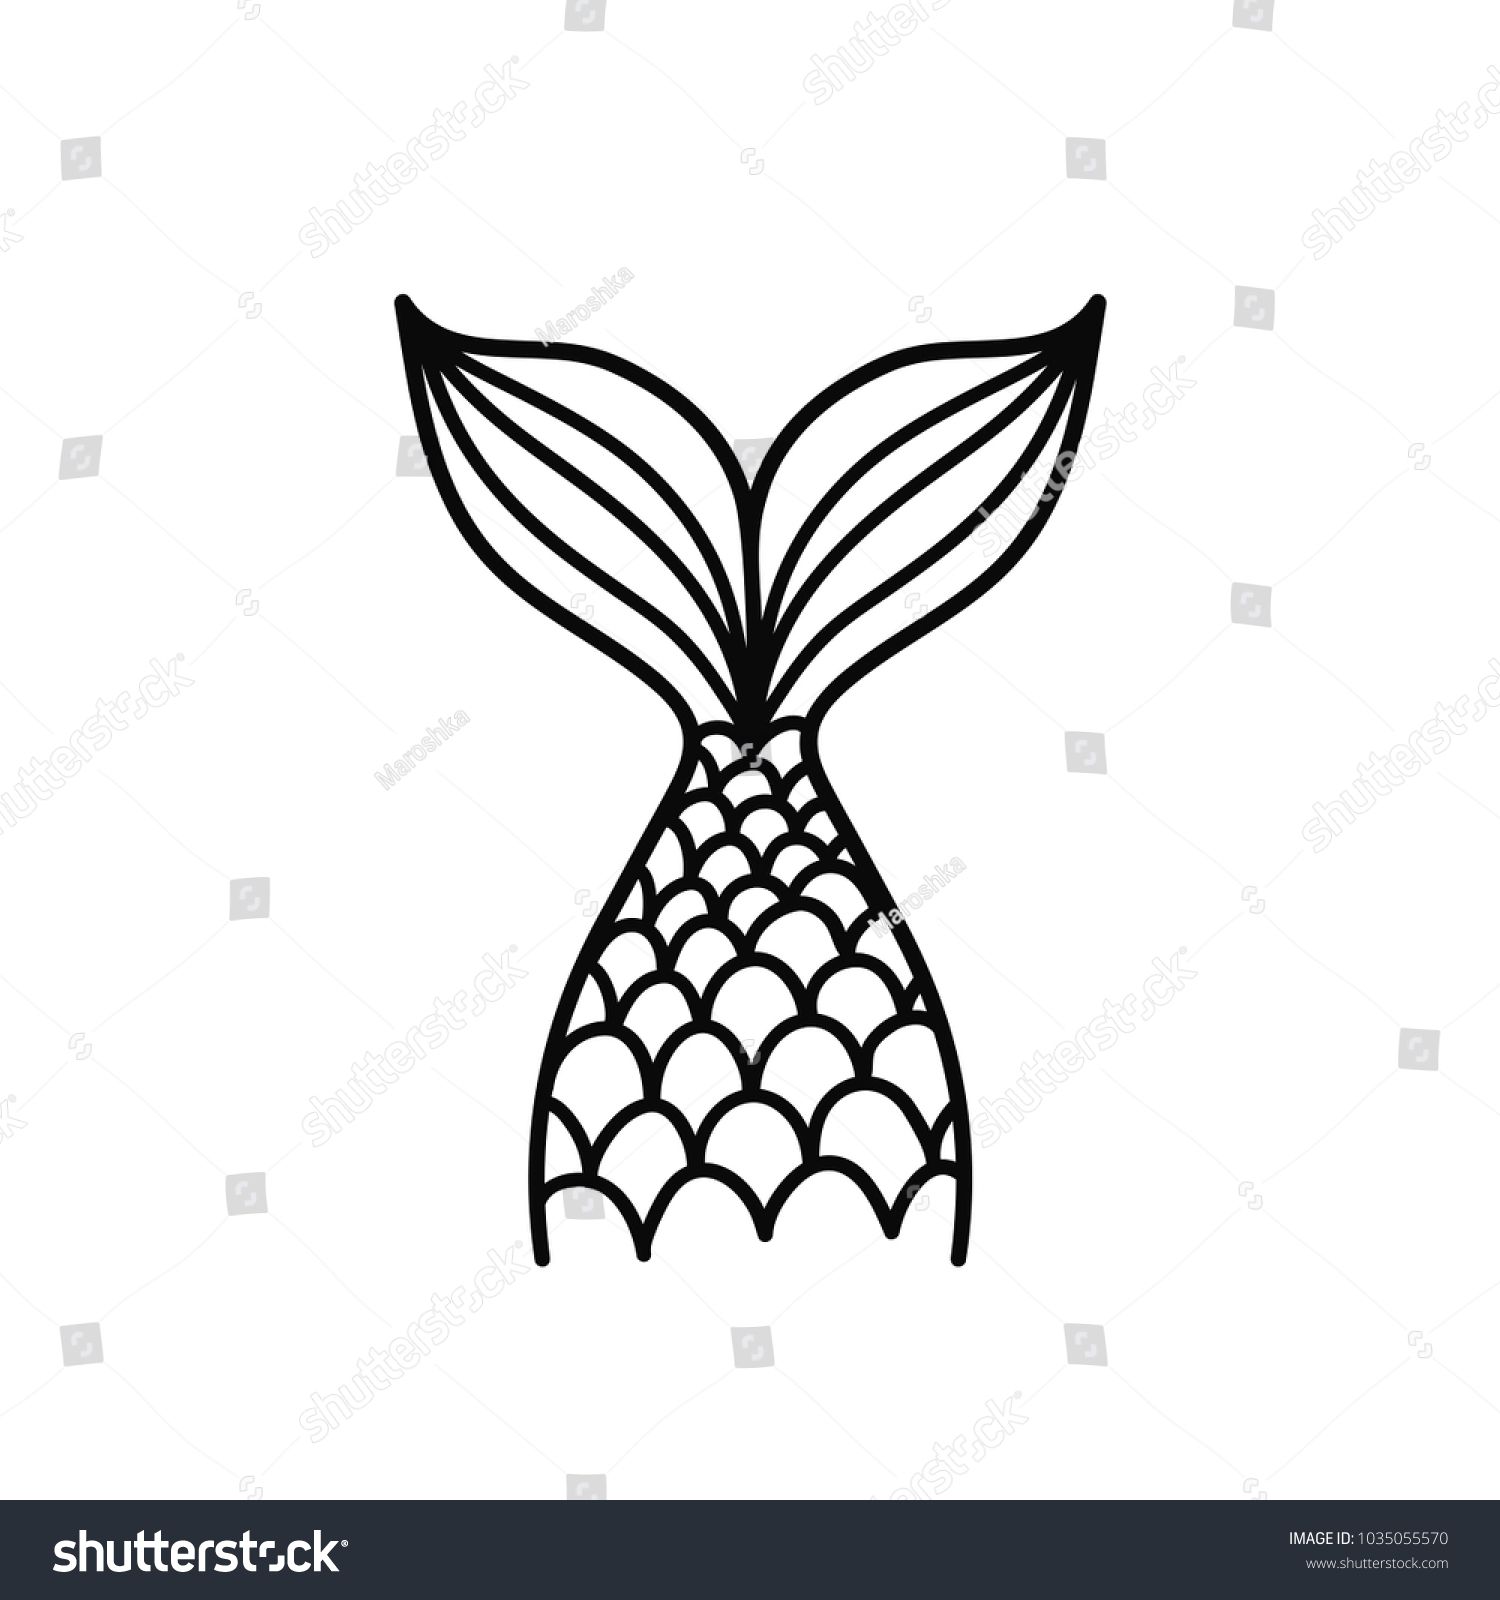 Download Mermaid Tail Vector at Vectorified.com | Collection of ...